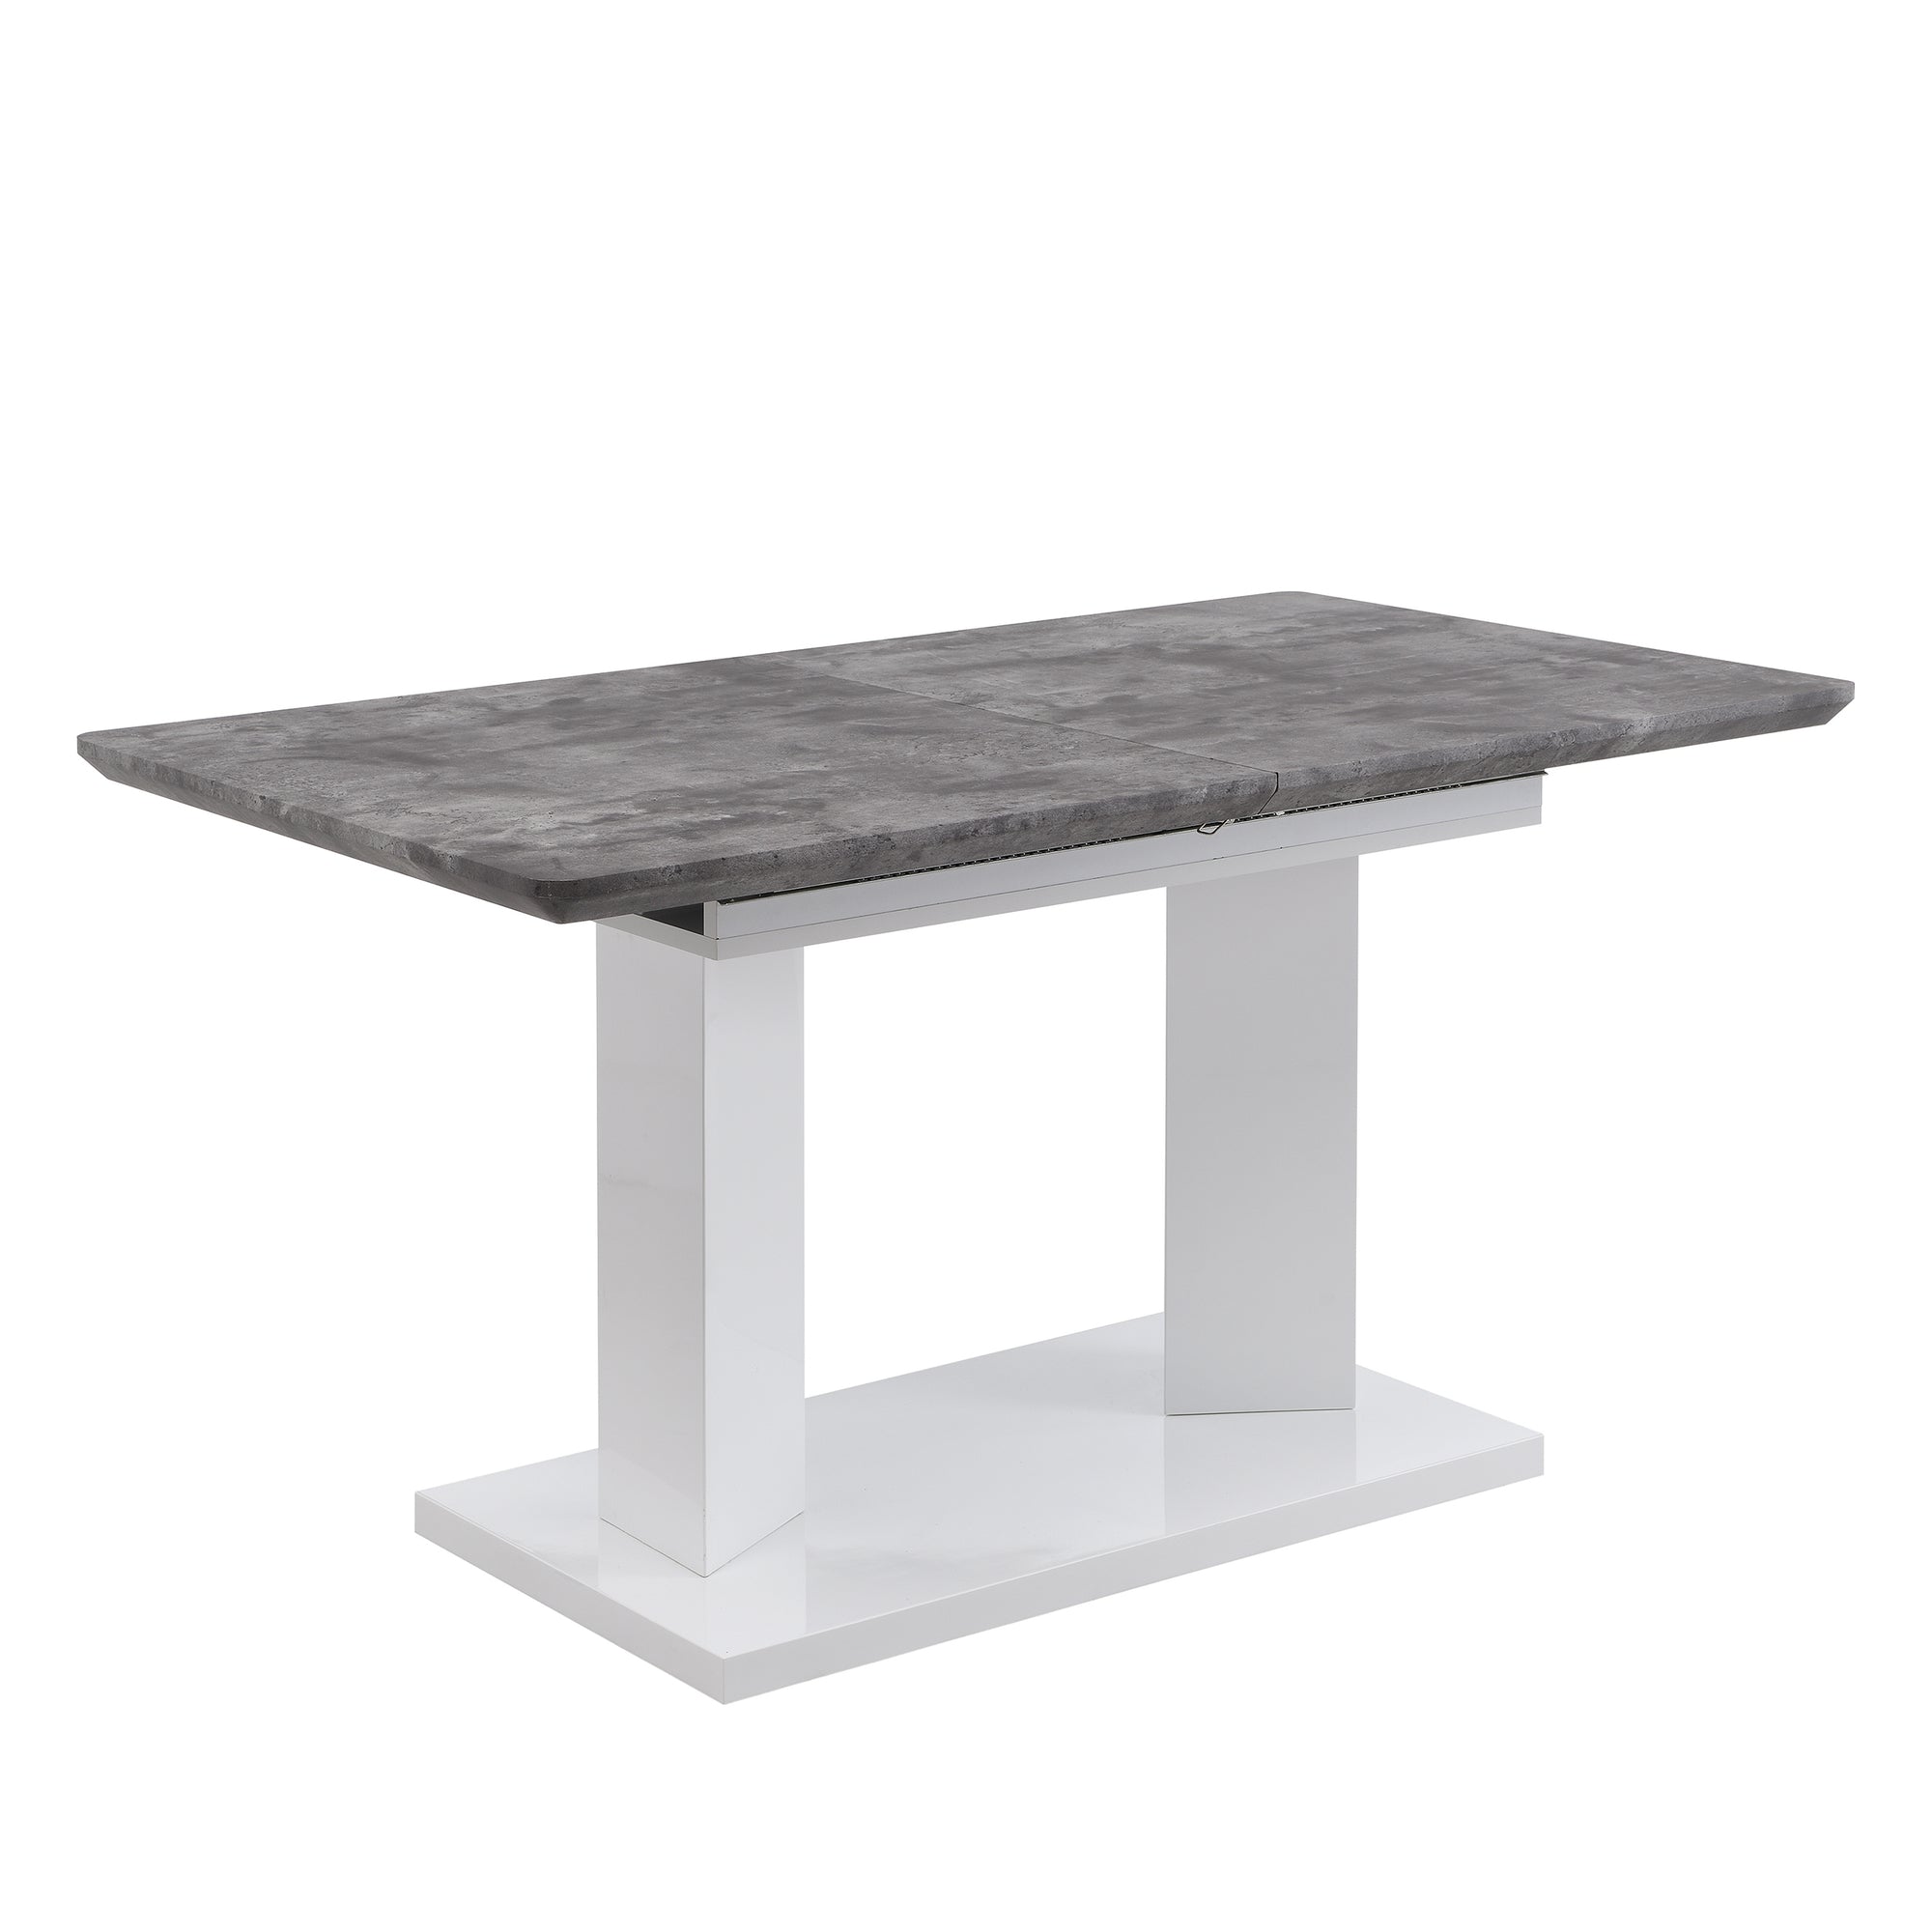 Goswell Concrete Effect Extending Dining Table 6 to 8 Seater